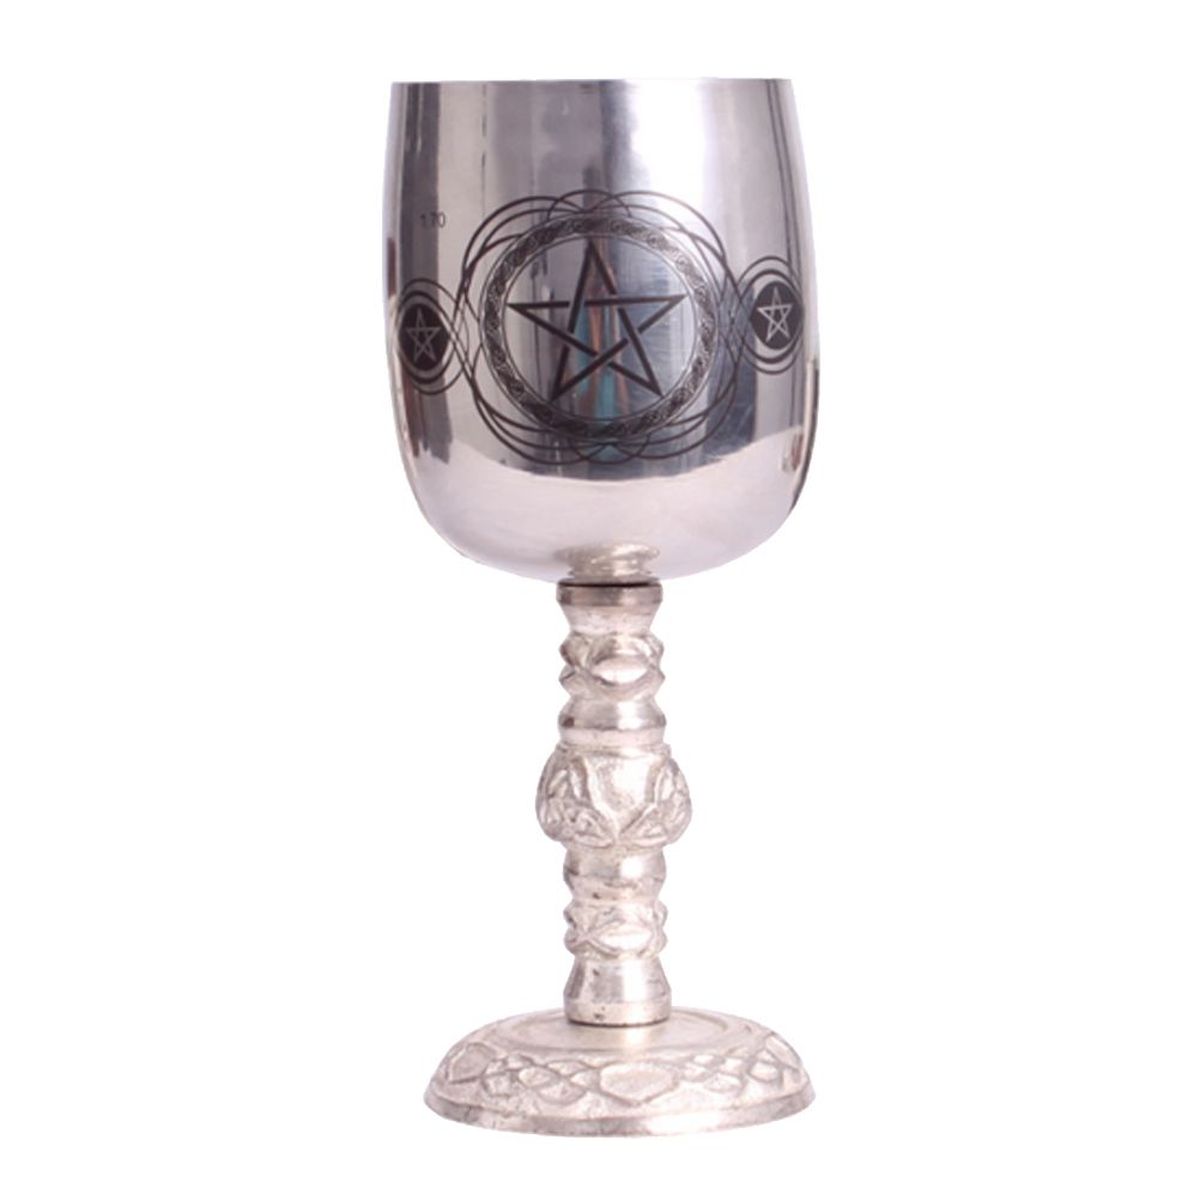 Chalice with Pentacle - Wicca